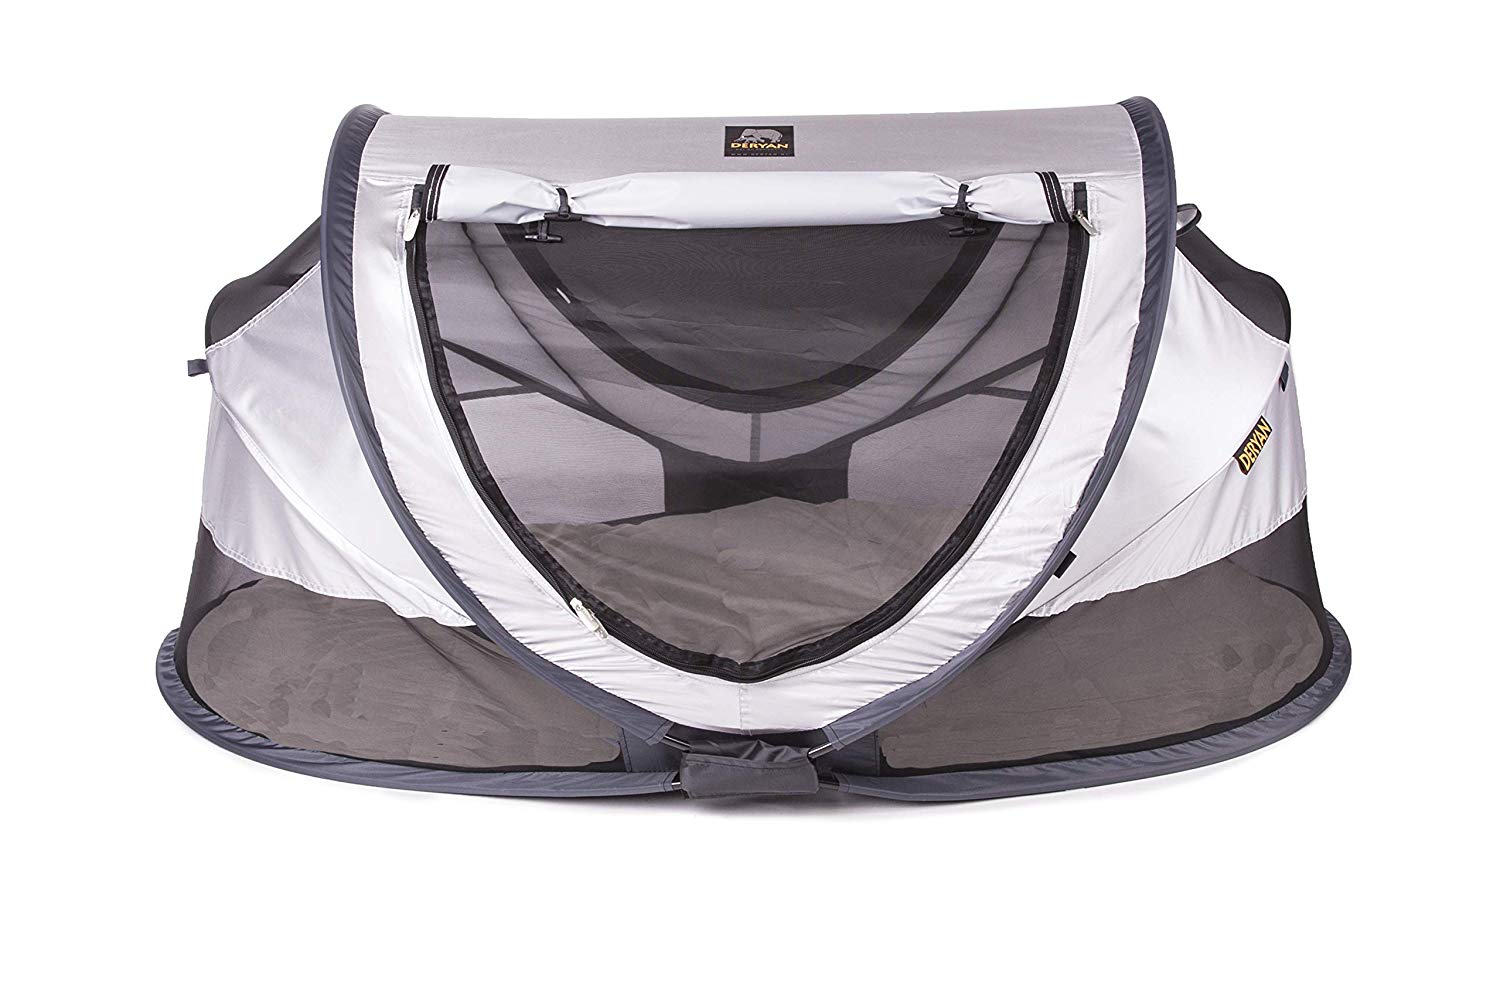 Deryan Travel Cot – Peuter Luxe – Blue – Pop-up – Sets up in just 2 seconds – Includes Zippered Cotton Cover, Self-inflating Air Mattress and Carry Bag.